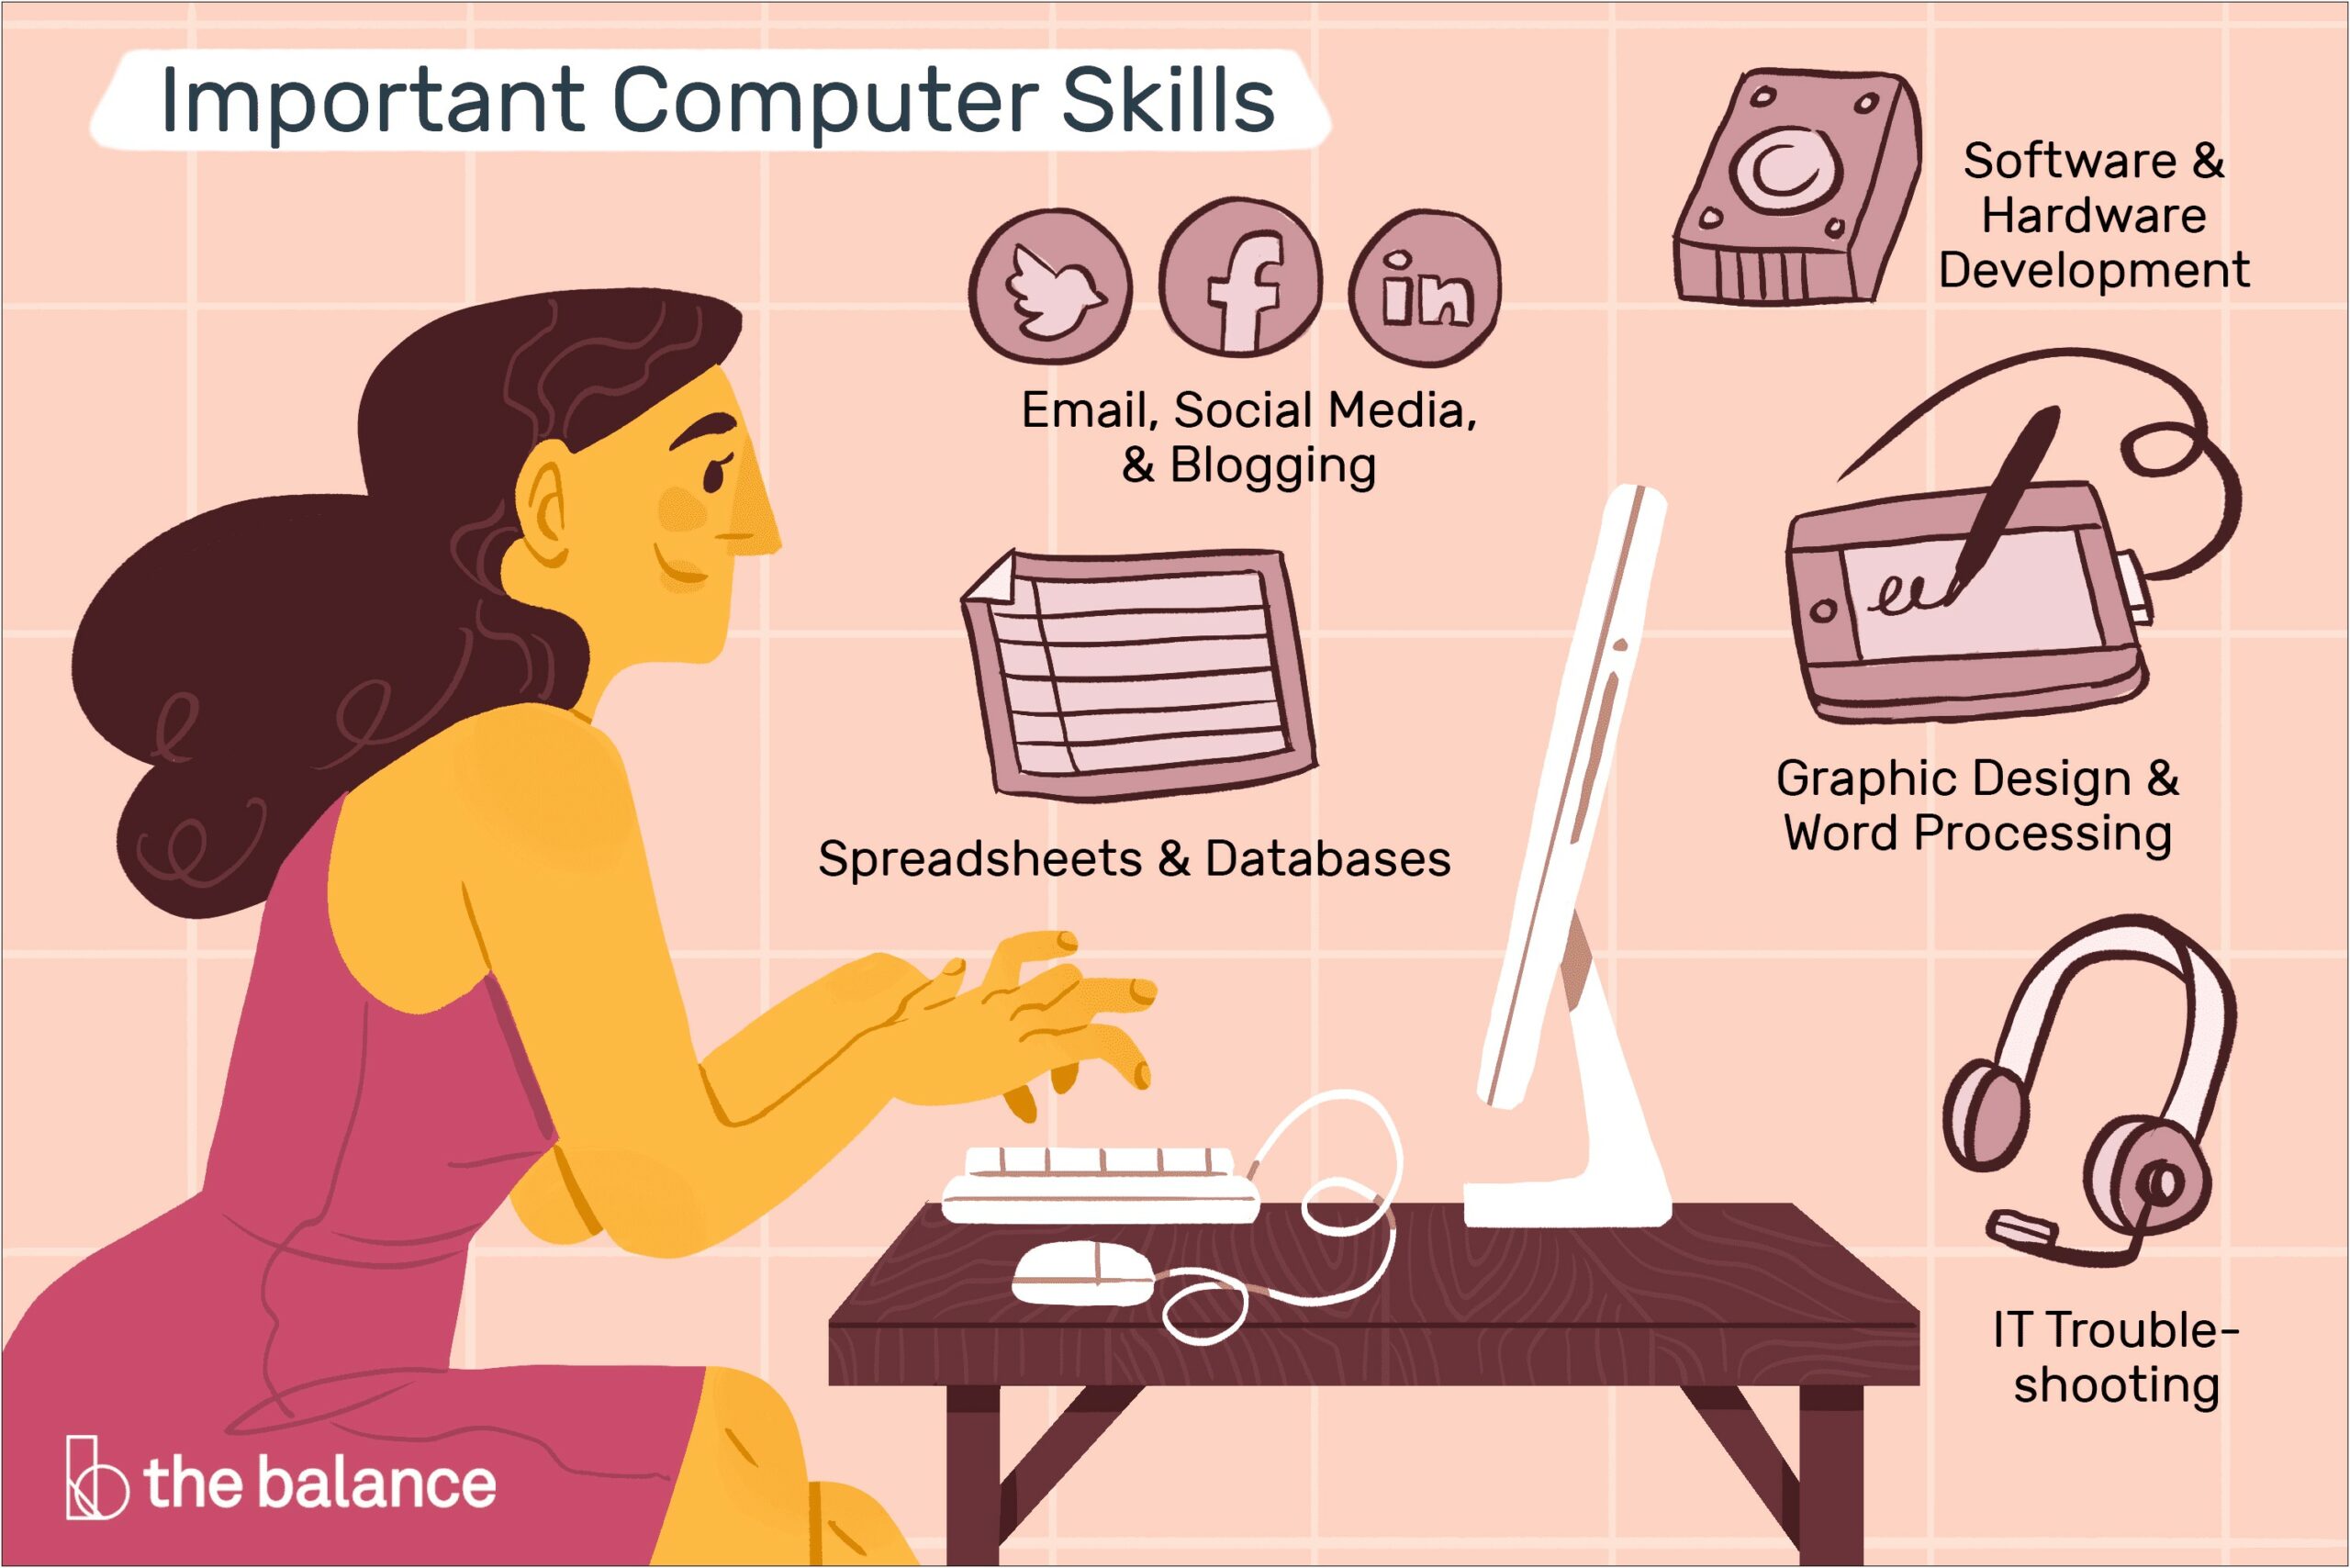 Basic Computer Skills For A Resume